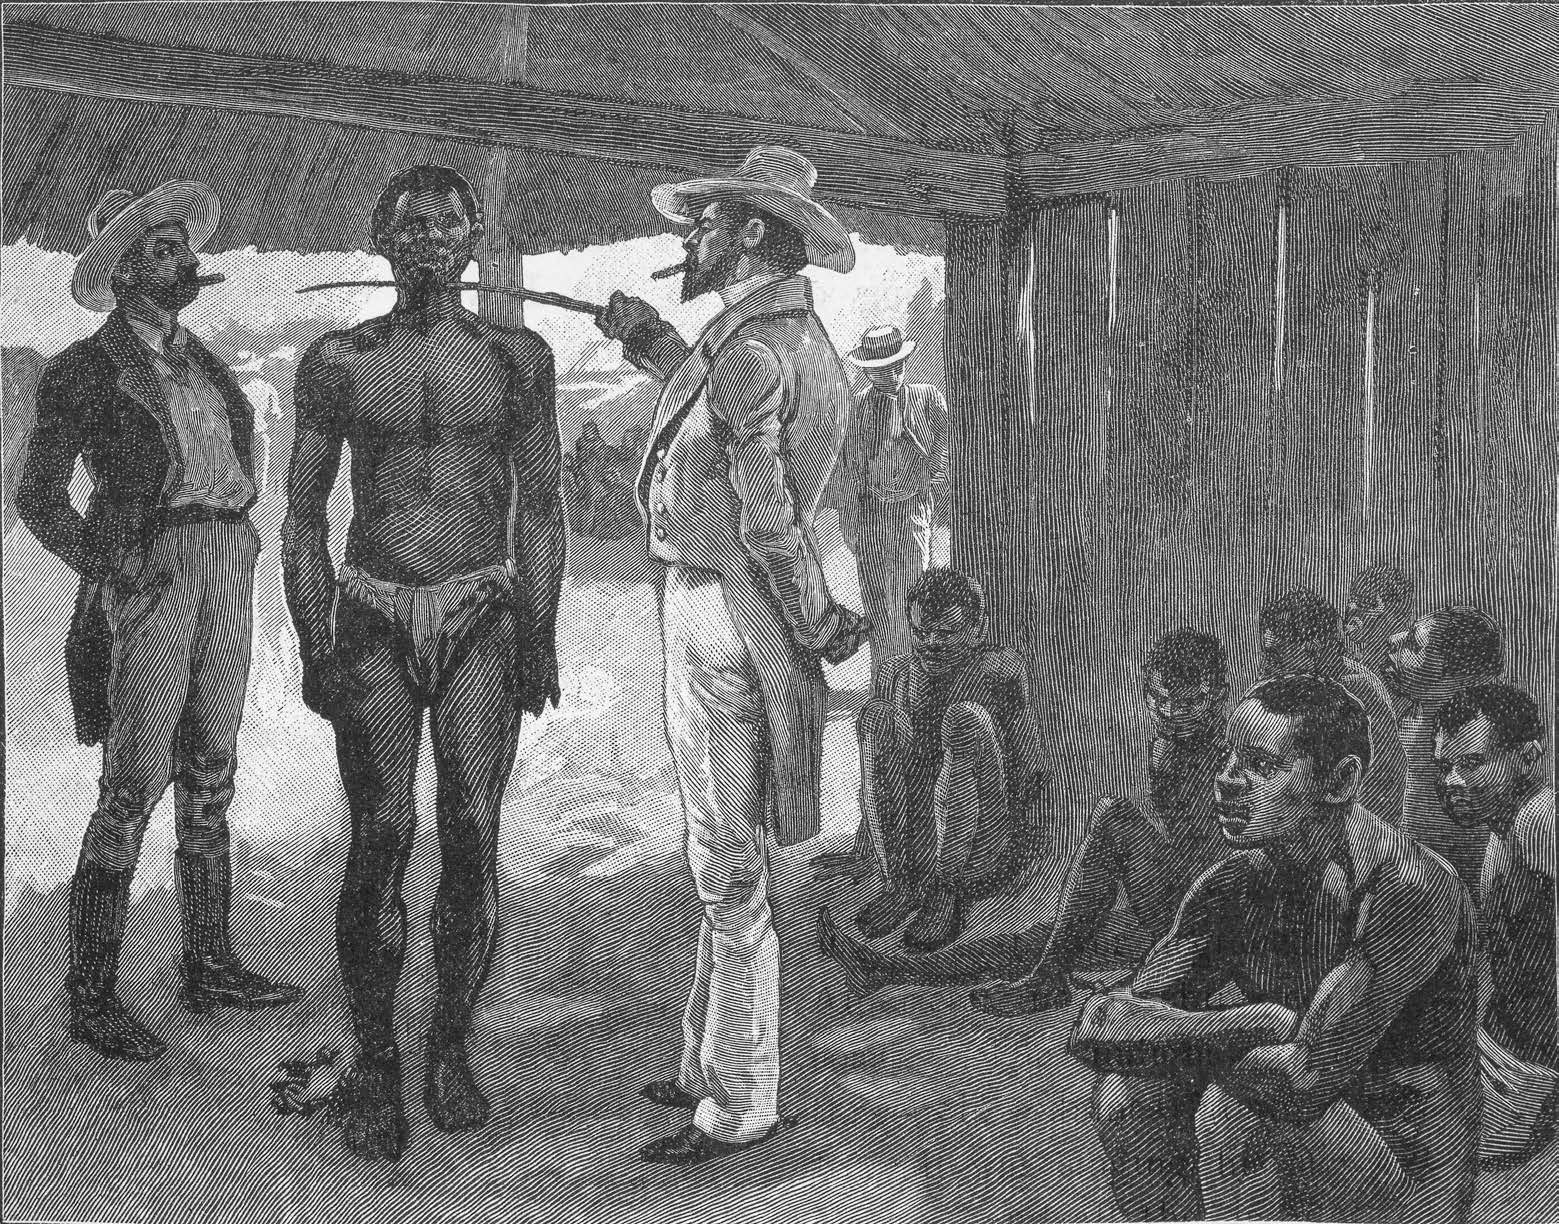 Buying Slaves, Havana, Cuba, 1837, in Arthur Thomas Quiller-Couch, ed., The Story of the Sea, 2:440. Courtesy of Slavery Images: A Visual Record of the African Slave Trade and Slave Life in the Early African Diaspora.